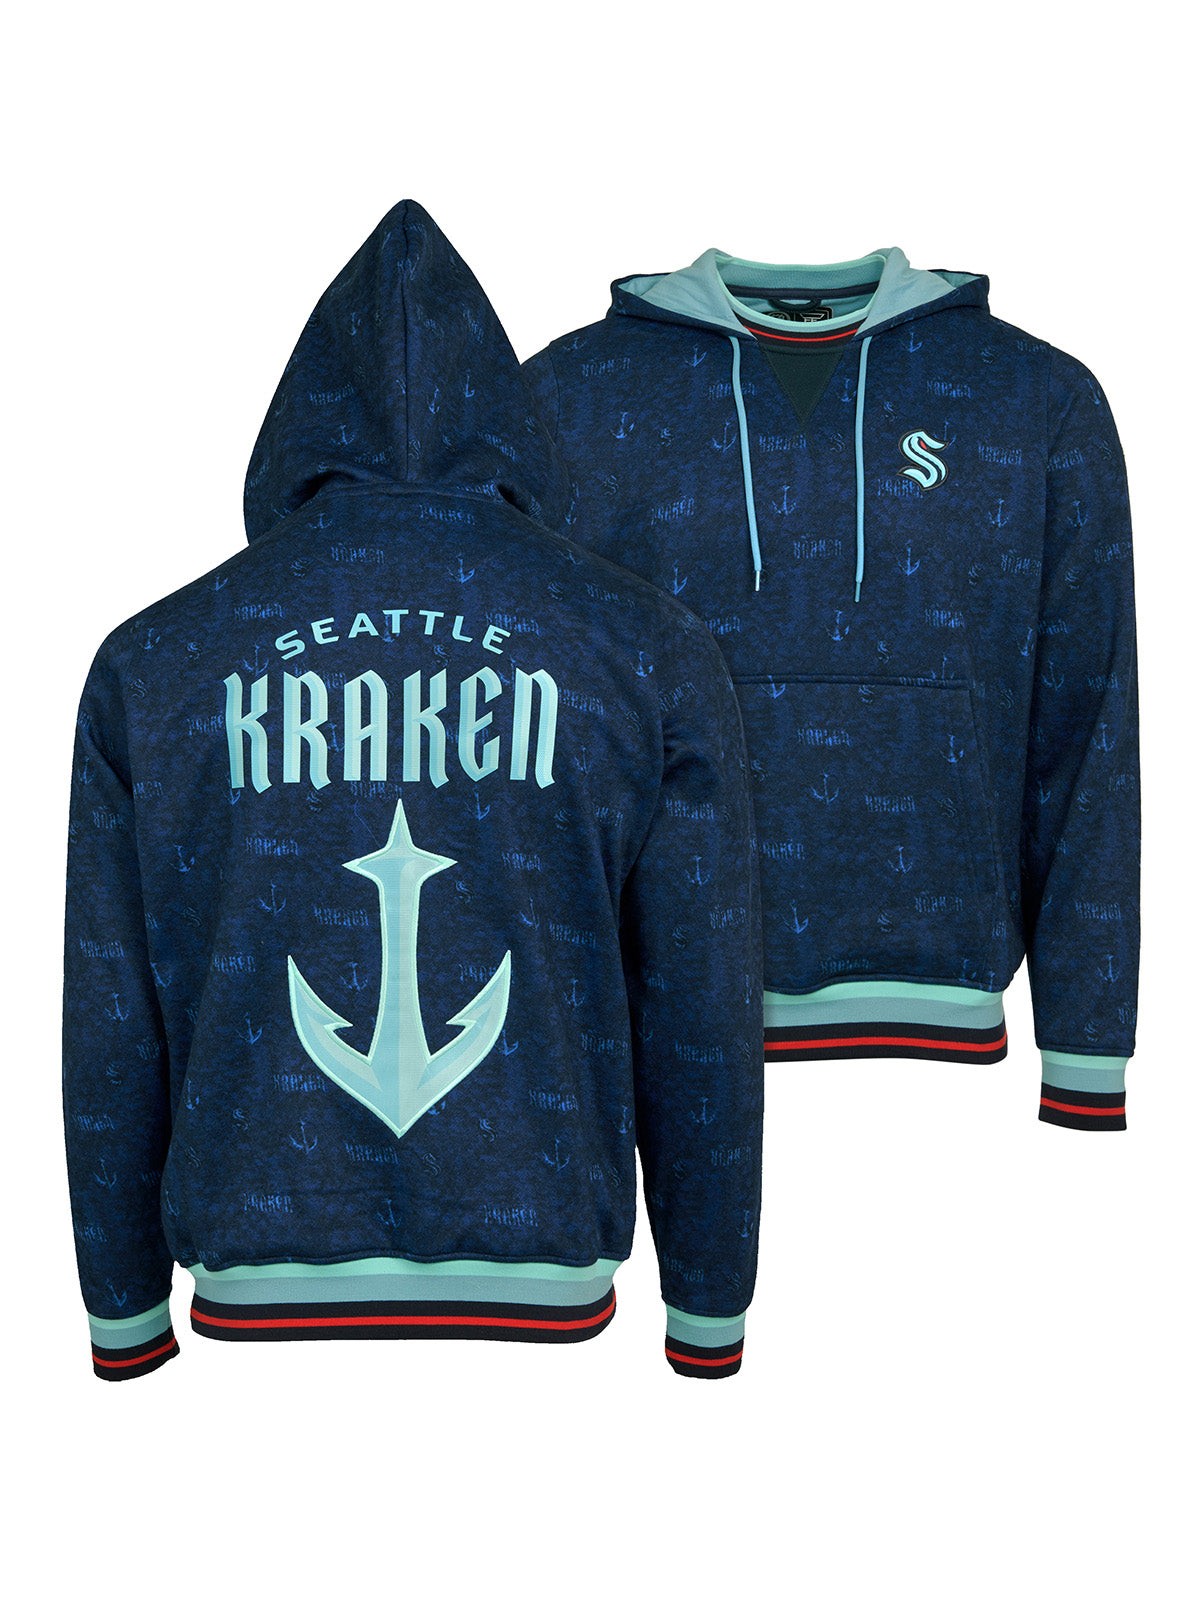 Seattle Kraken Hoodie - Show your team spirit, with the iconic team logo patch on the front and back, and proudly display your Seattle Kraken support in their team colors with this NHL hockey hoodie.